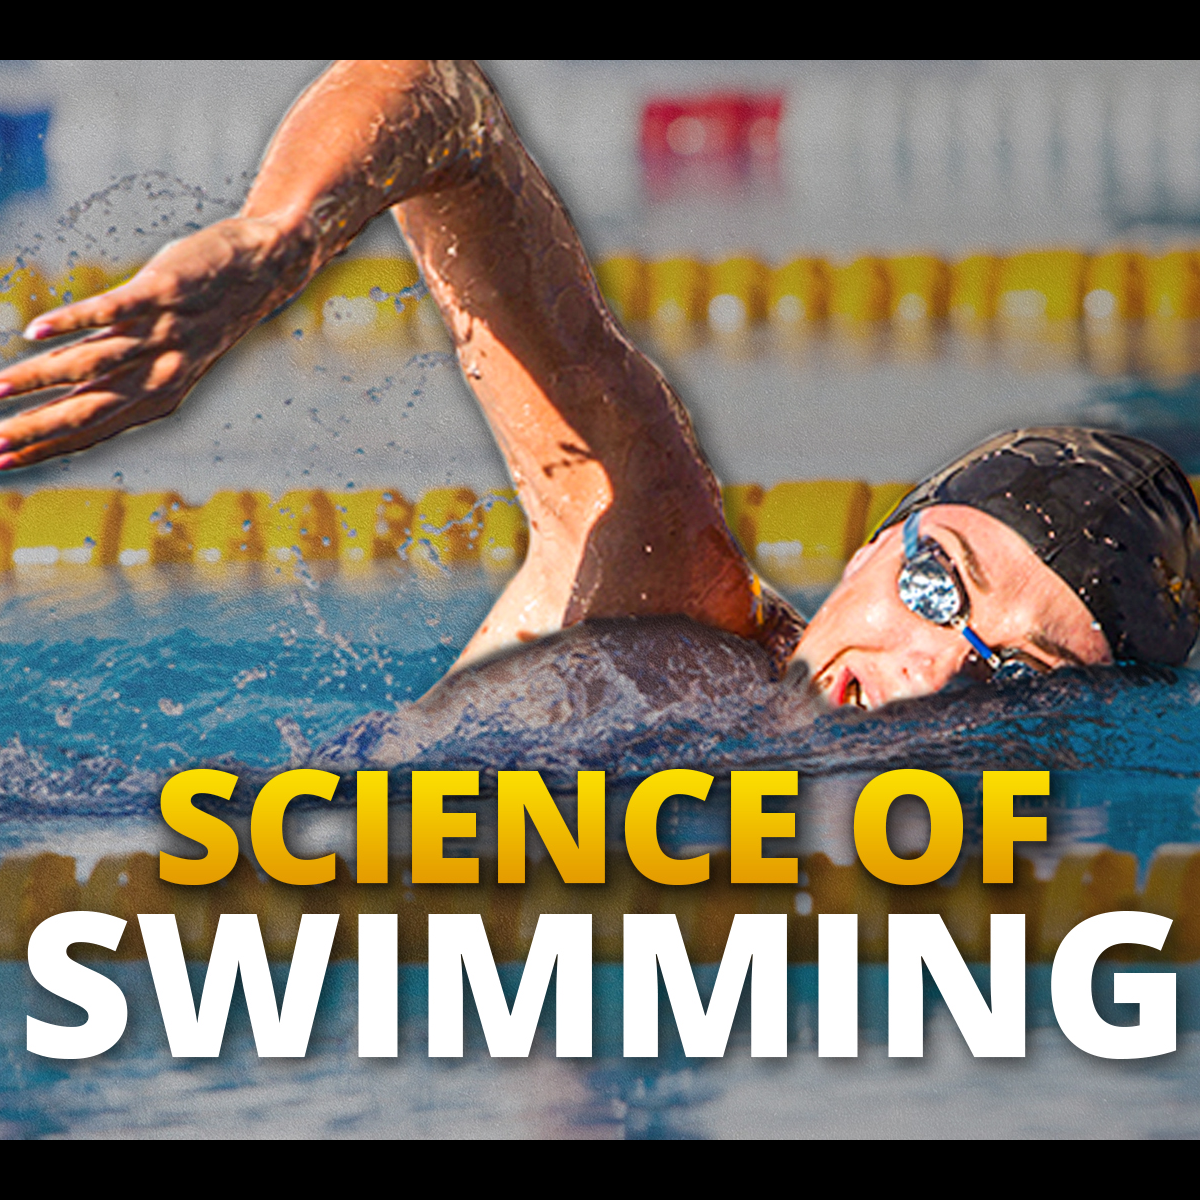 Does swimming build muscle?